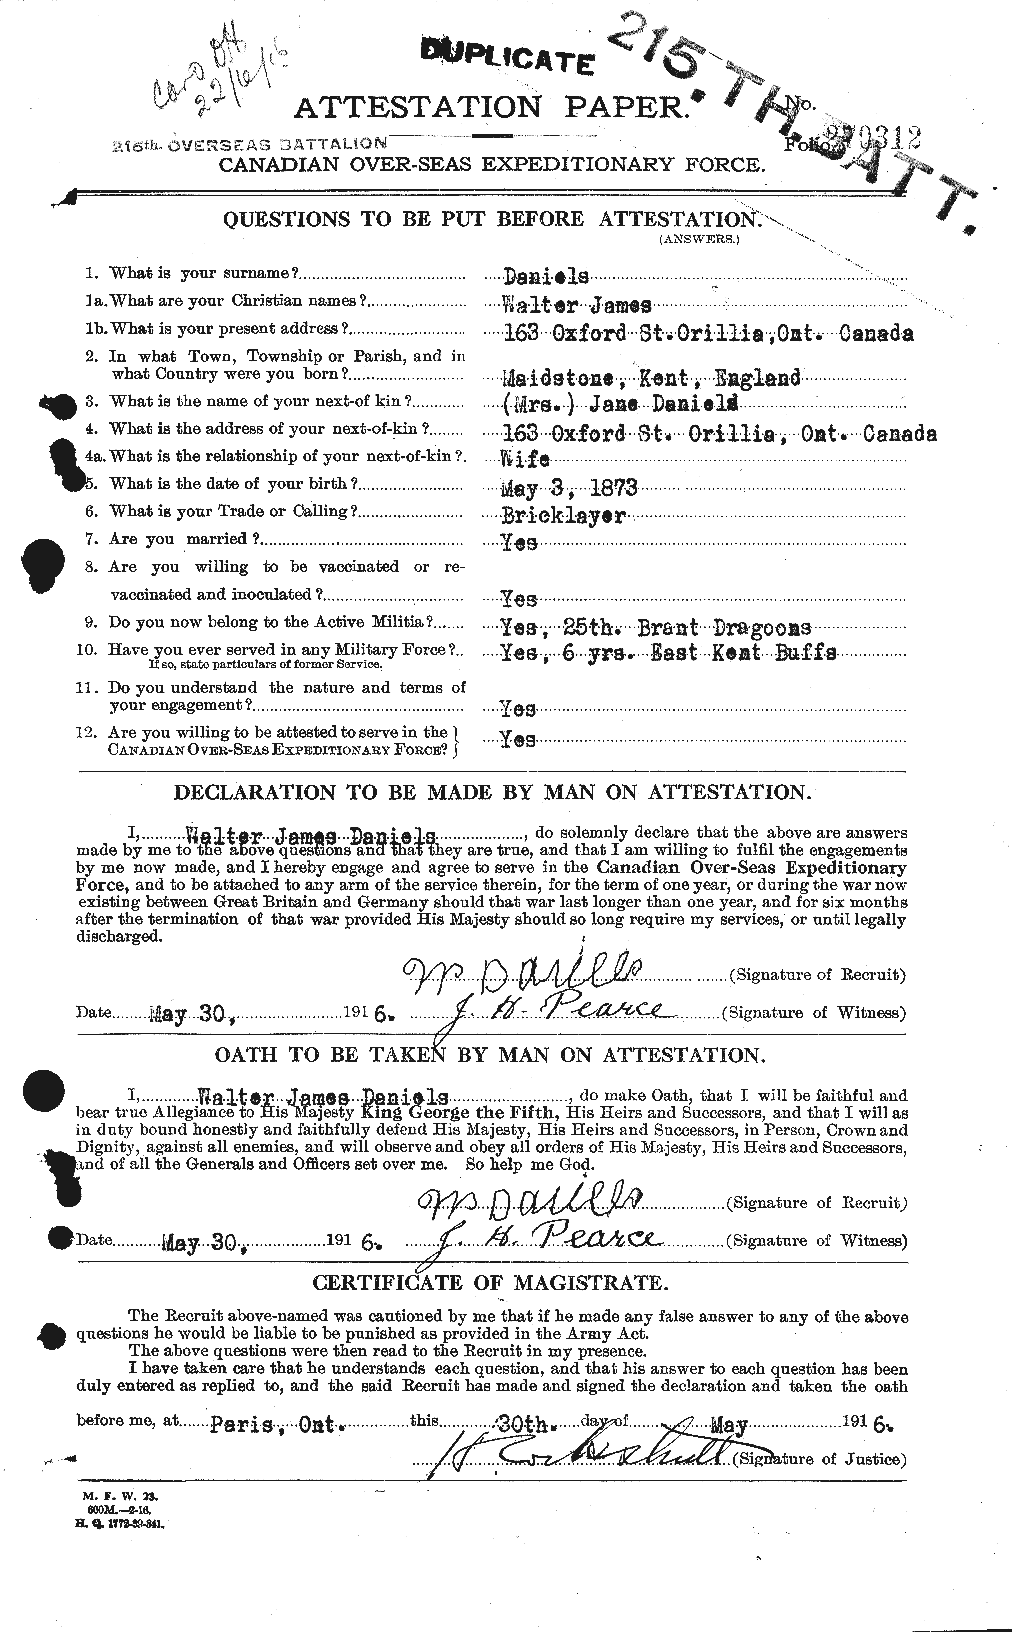 Personnel Records of the First World War - CEF 279683a